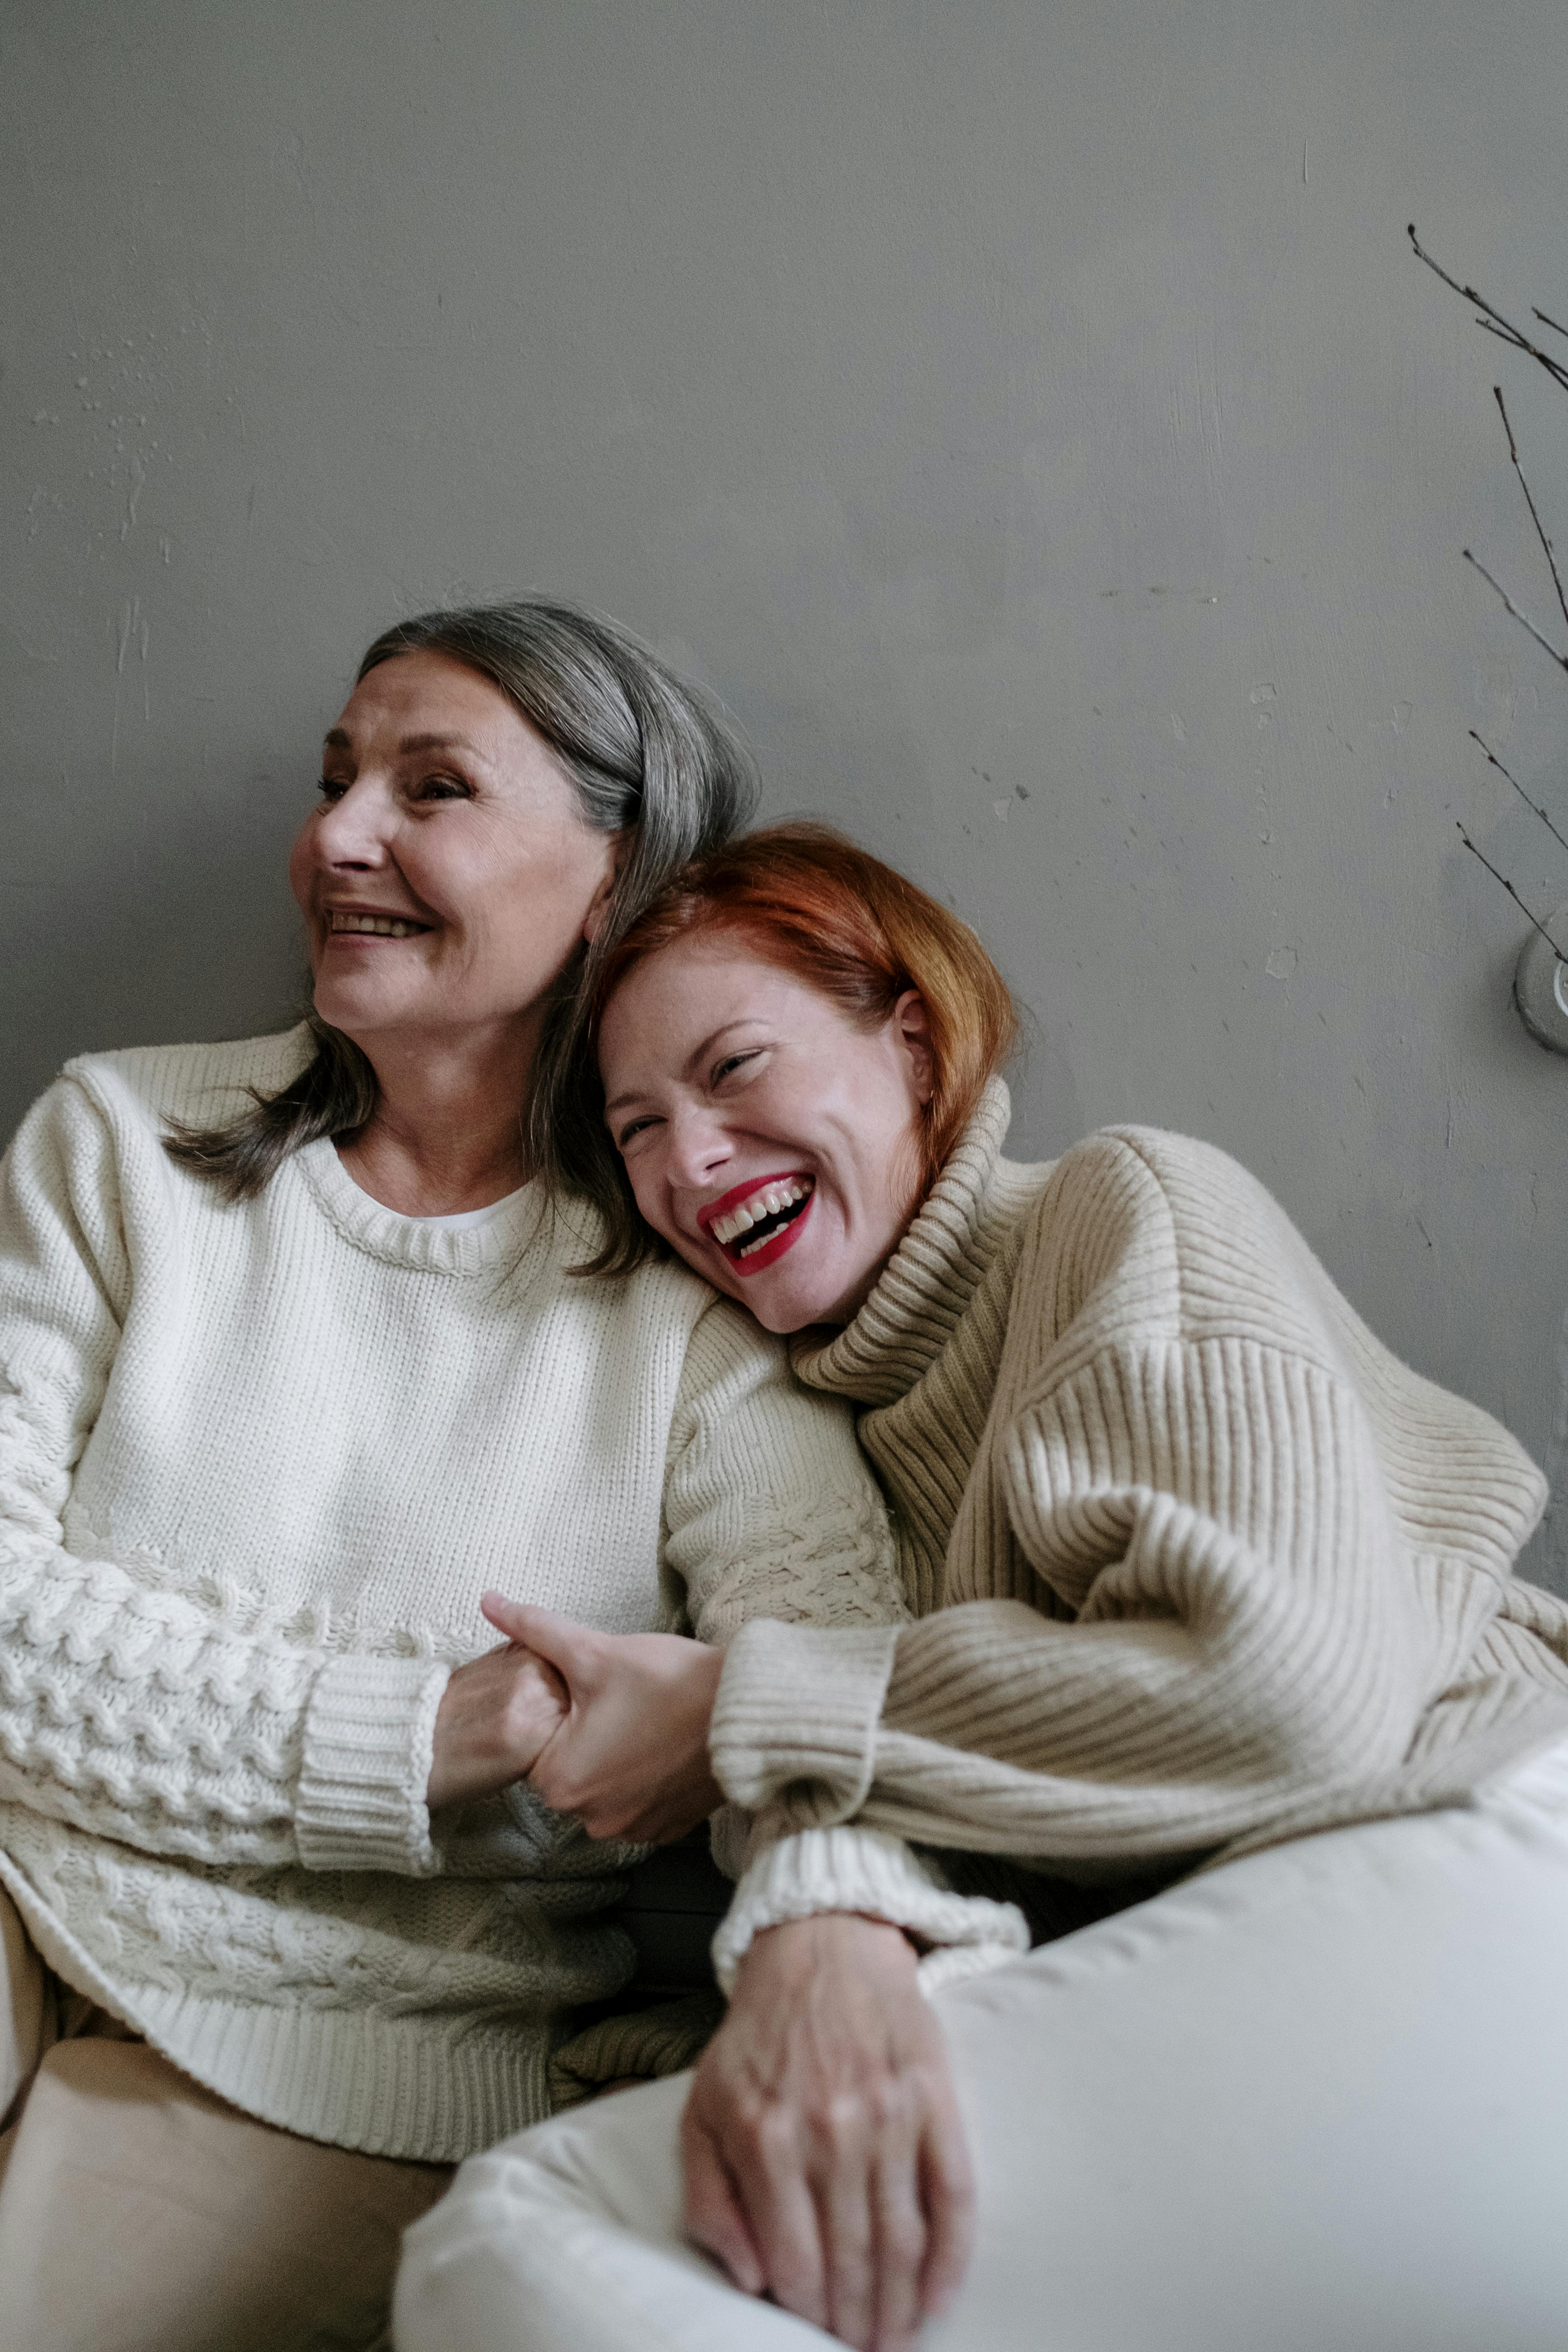 A happy mother and daughter laughing and holding hands | Source: Pexels